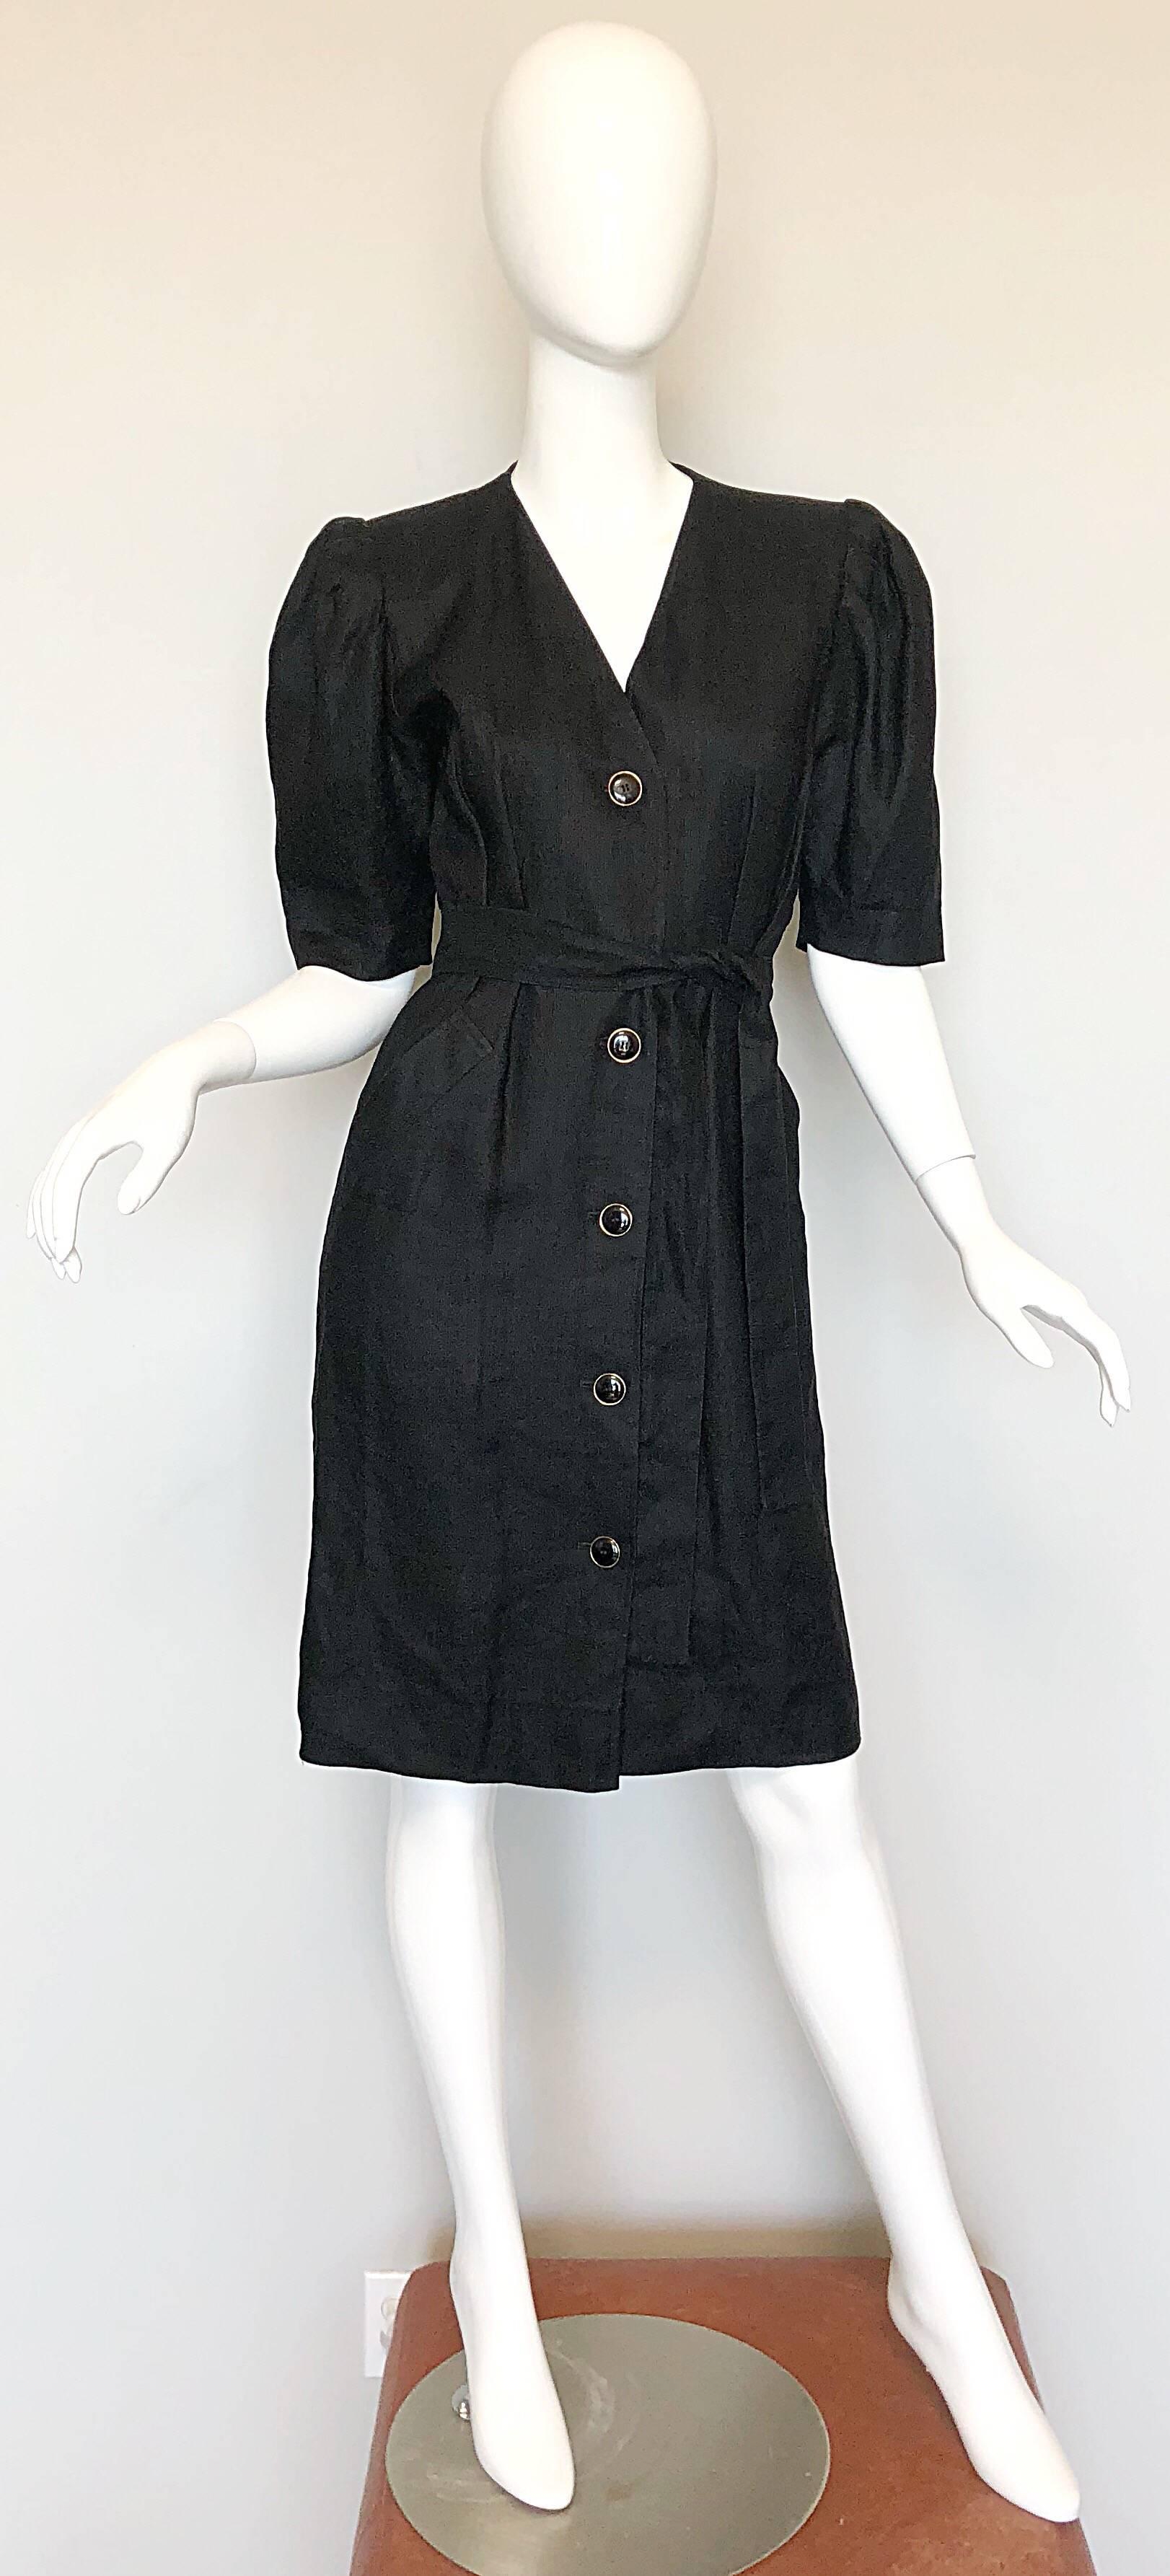 Chic vintage YVES SAINT LAURENT Rive Gauche 1980s short sleeve black linen dress! Features black and gold buttons down the entire front, with a hidden hook-and-eye closure at inner waist. Detachable sash belt, and POCKETS at each side of the hips.